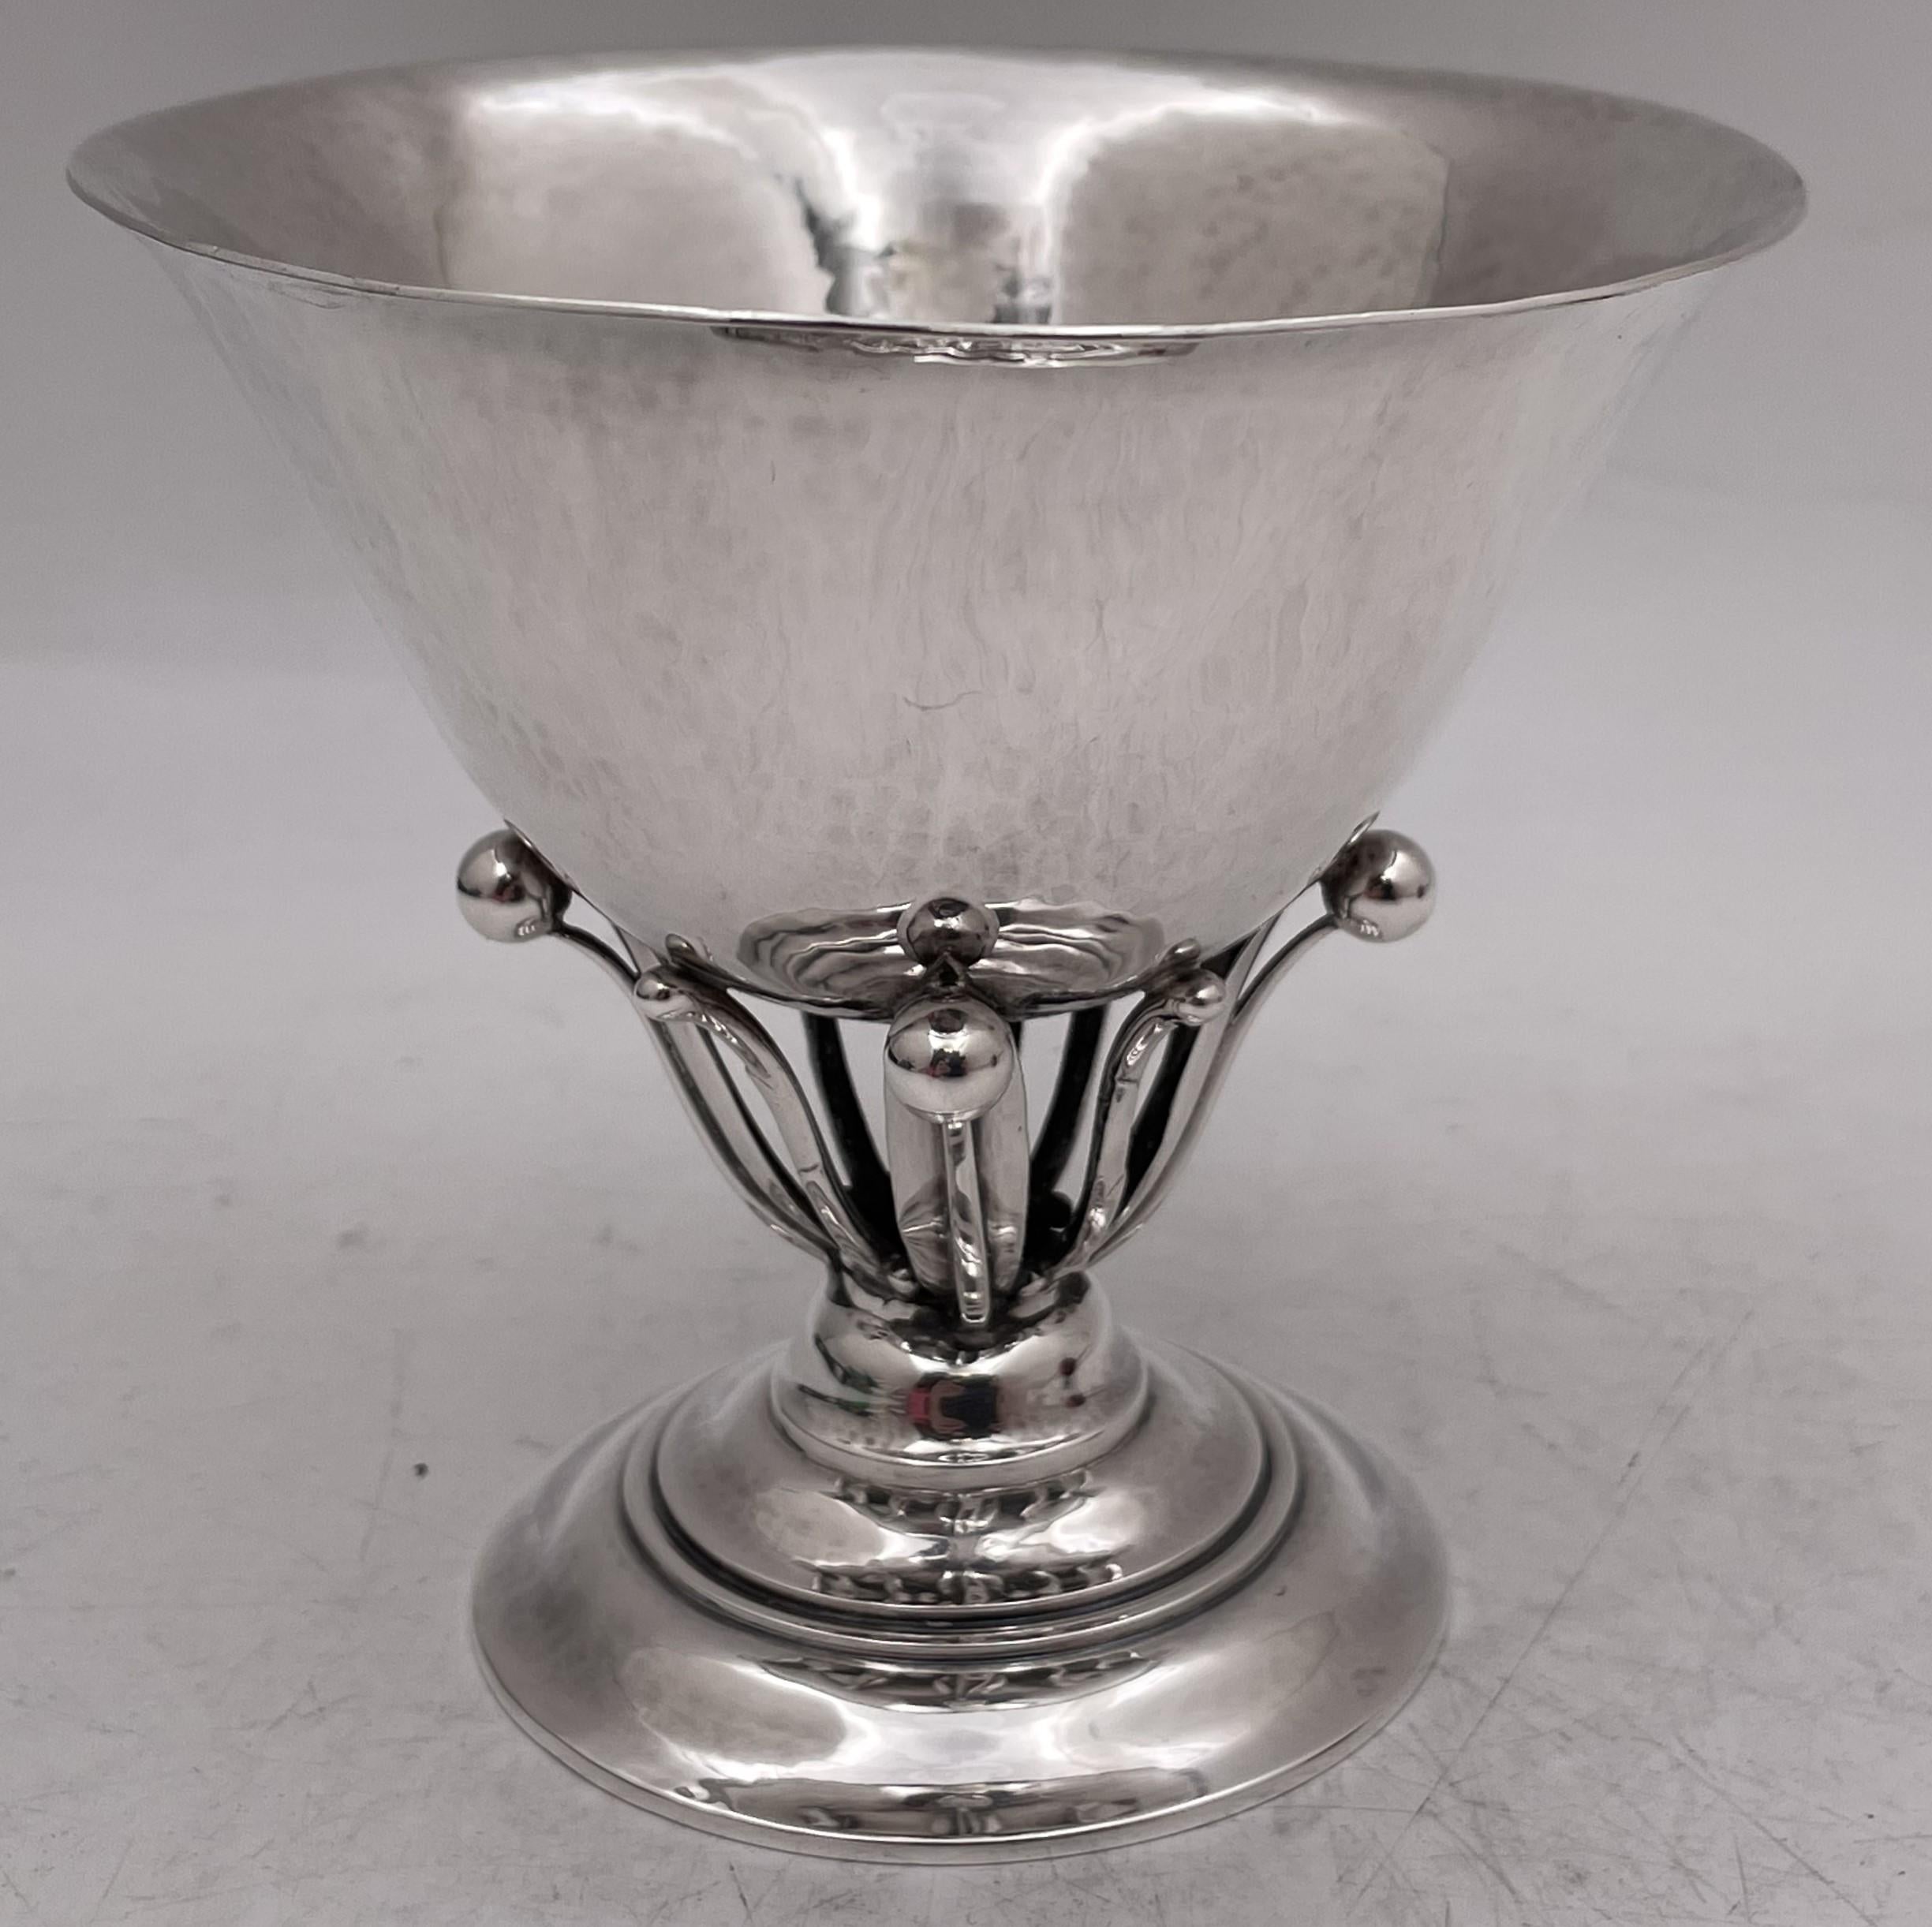 Georg Jensen sterling silver bowl, designed by Johan Rohde, in pattern number 17A, beautifully hand hammered, showcasing stylized natural motifs, and standing on a stepped circular base. It measures 4 1/4'' in diameter by 4 1/8'' in height, weighs 6